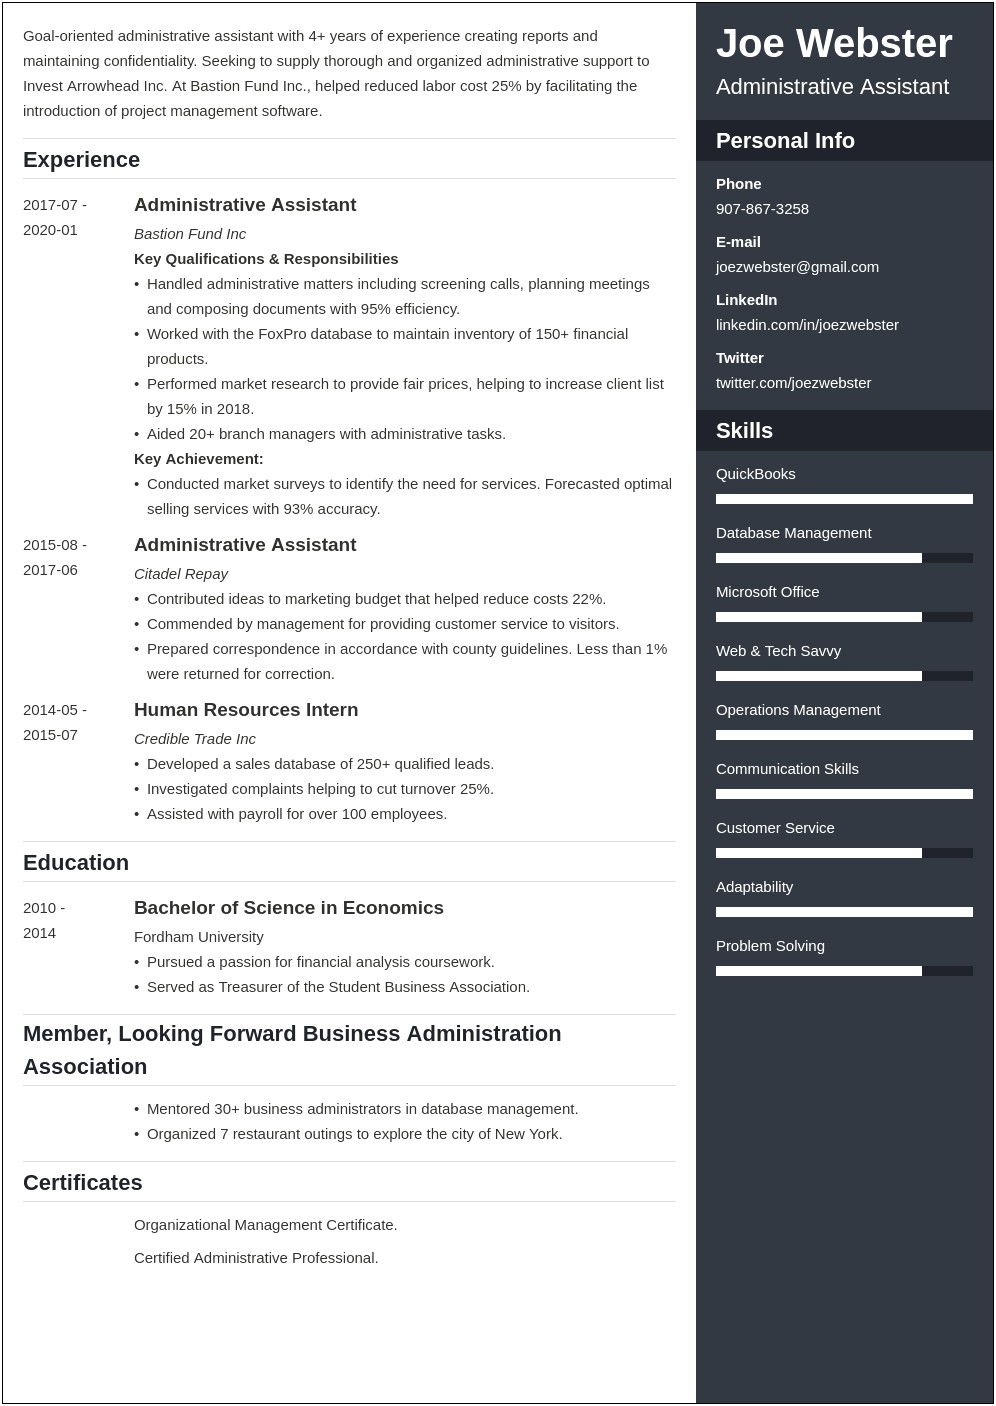 Associates Degree In Business Administration Management On Resume